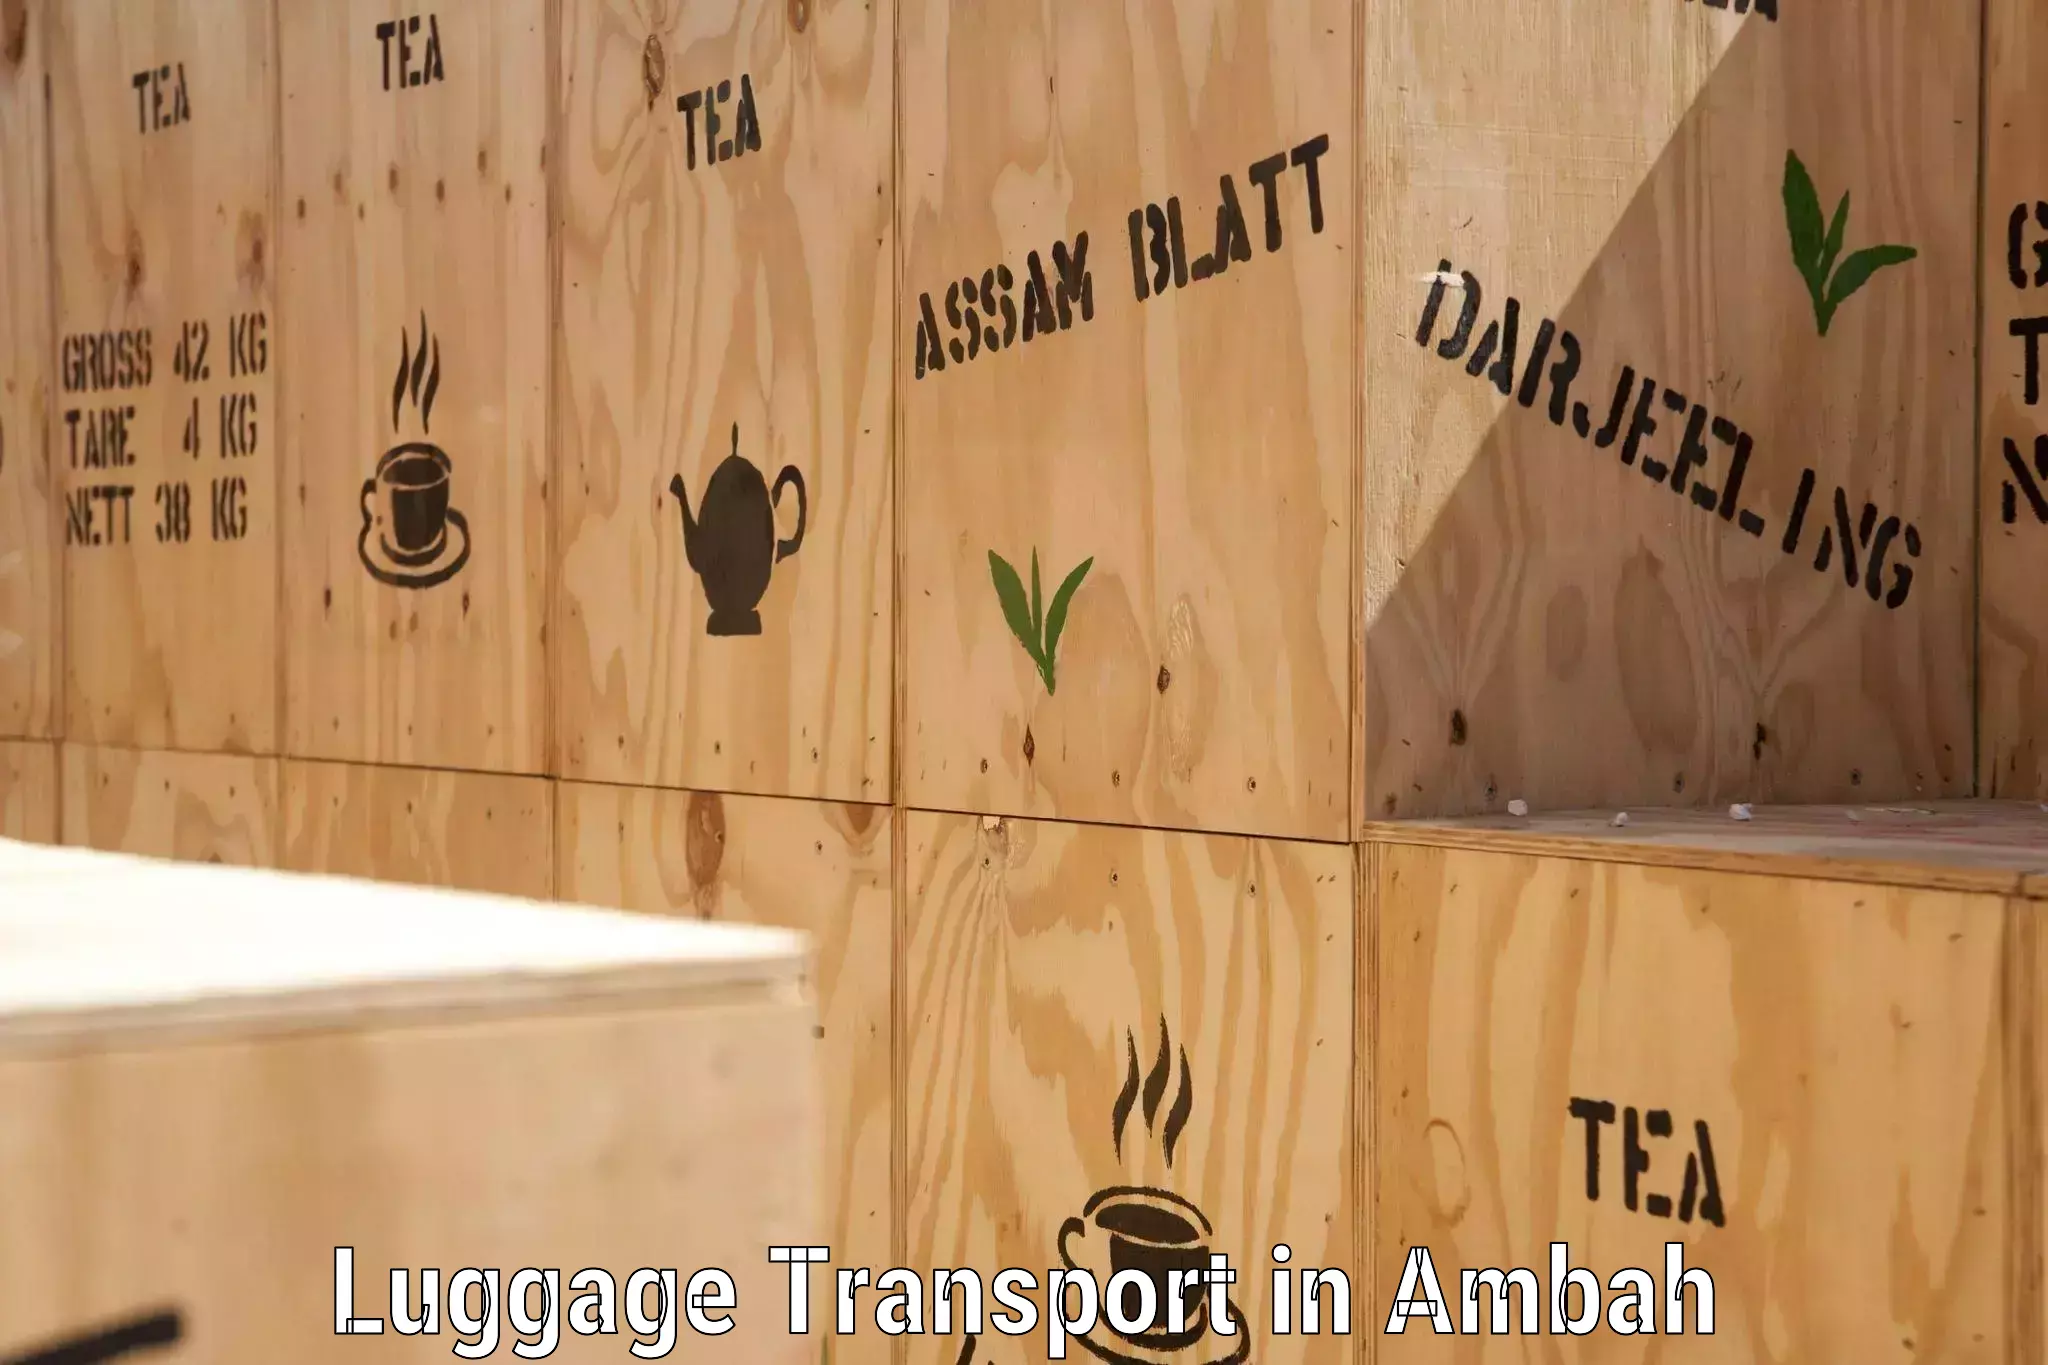 Luggage transport operations in Ambah